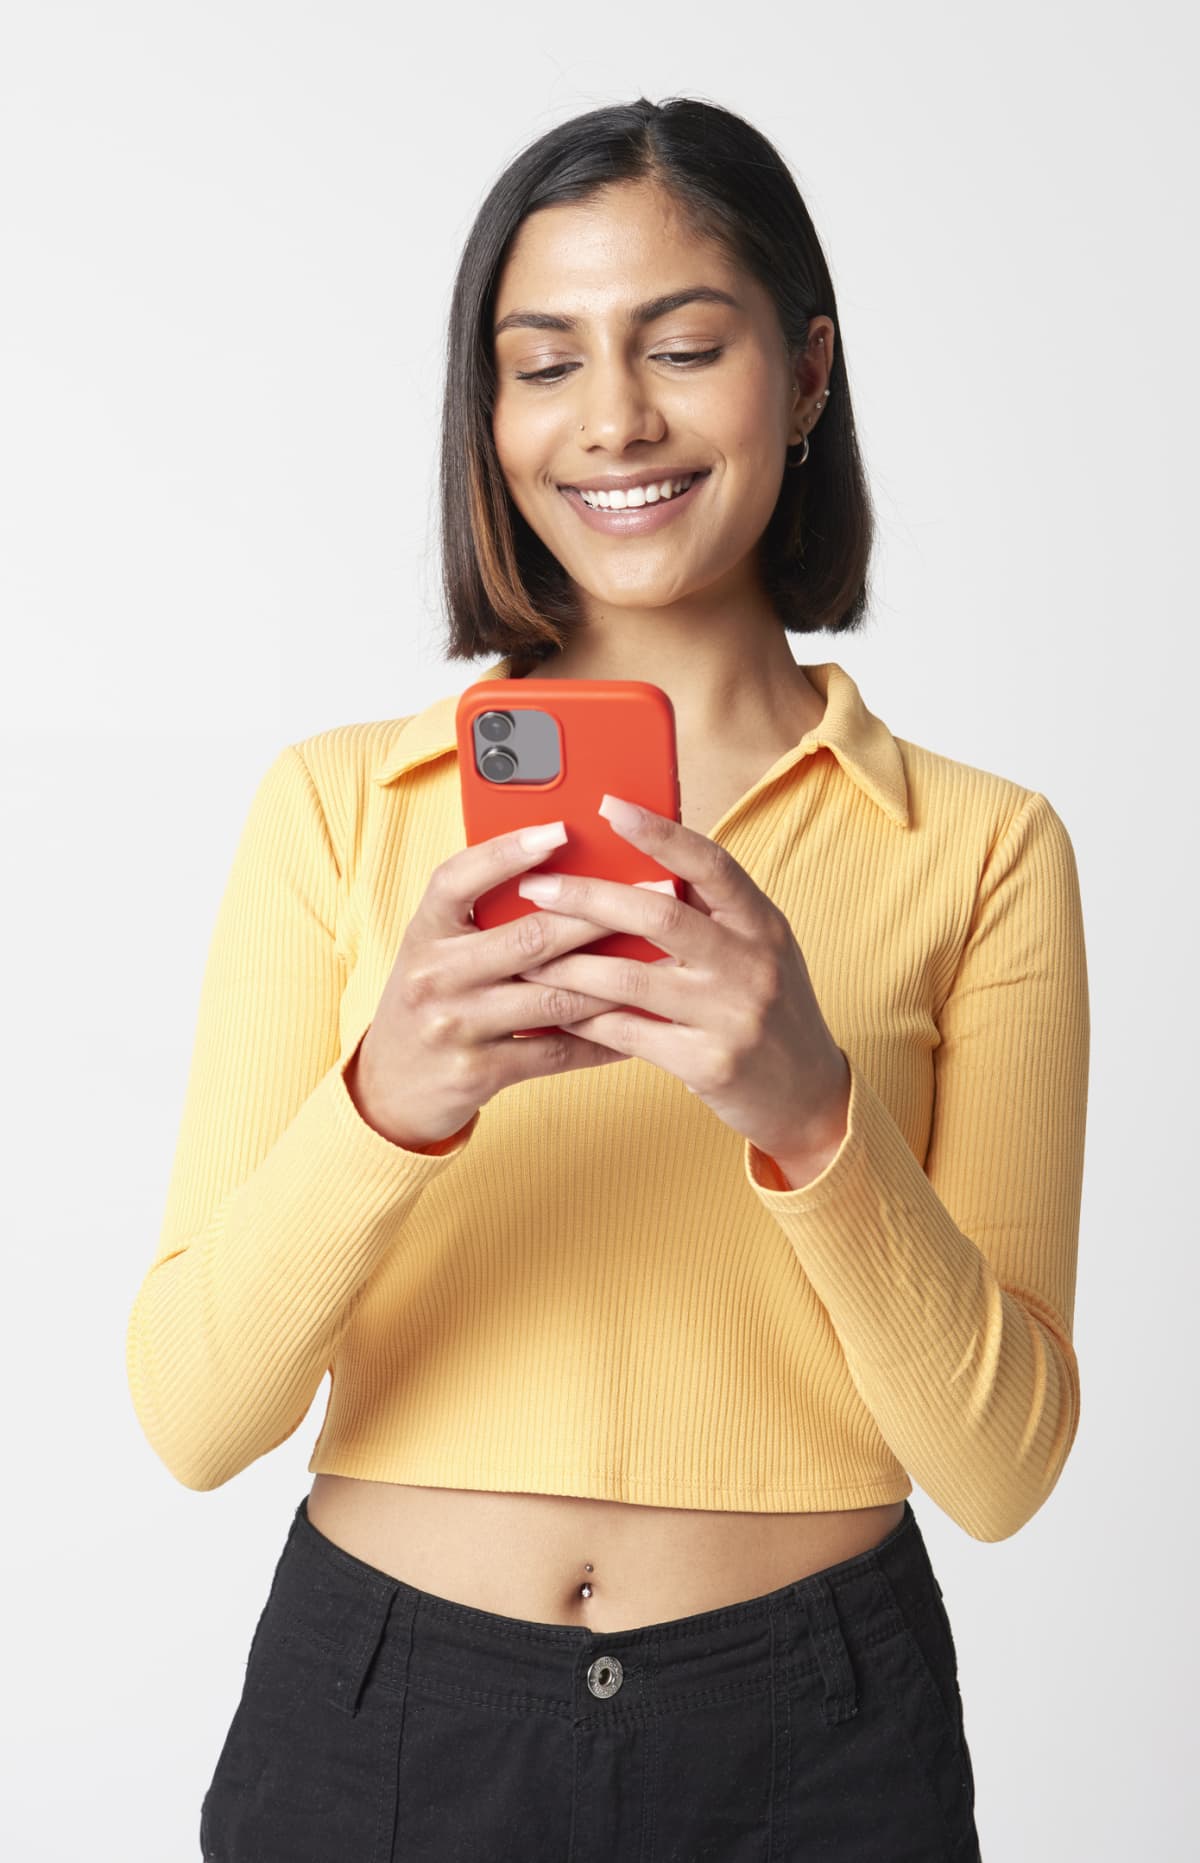 young woman smiling and looking at mobile phone against white background